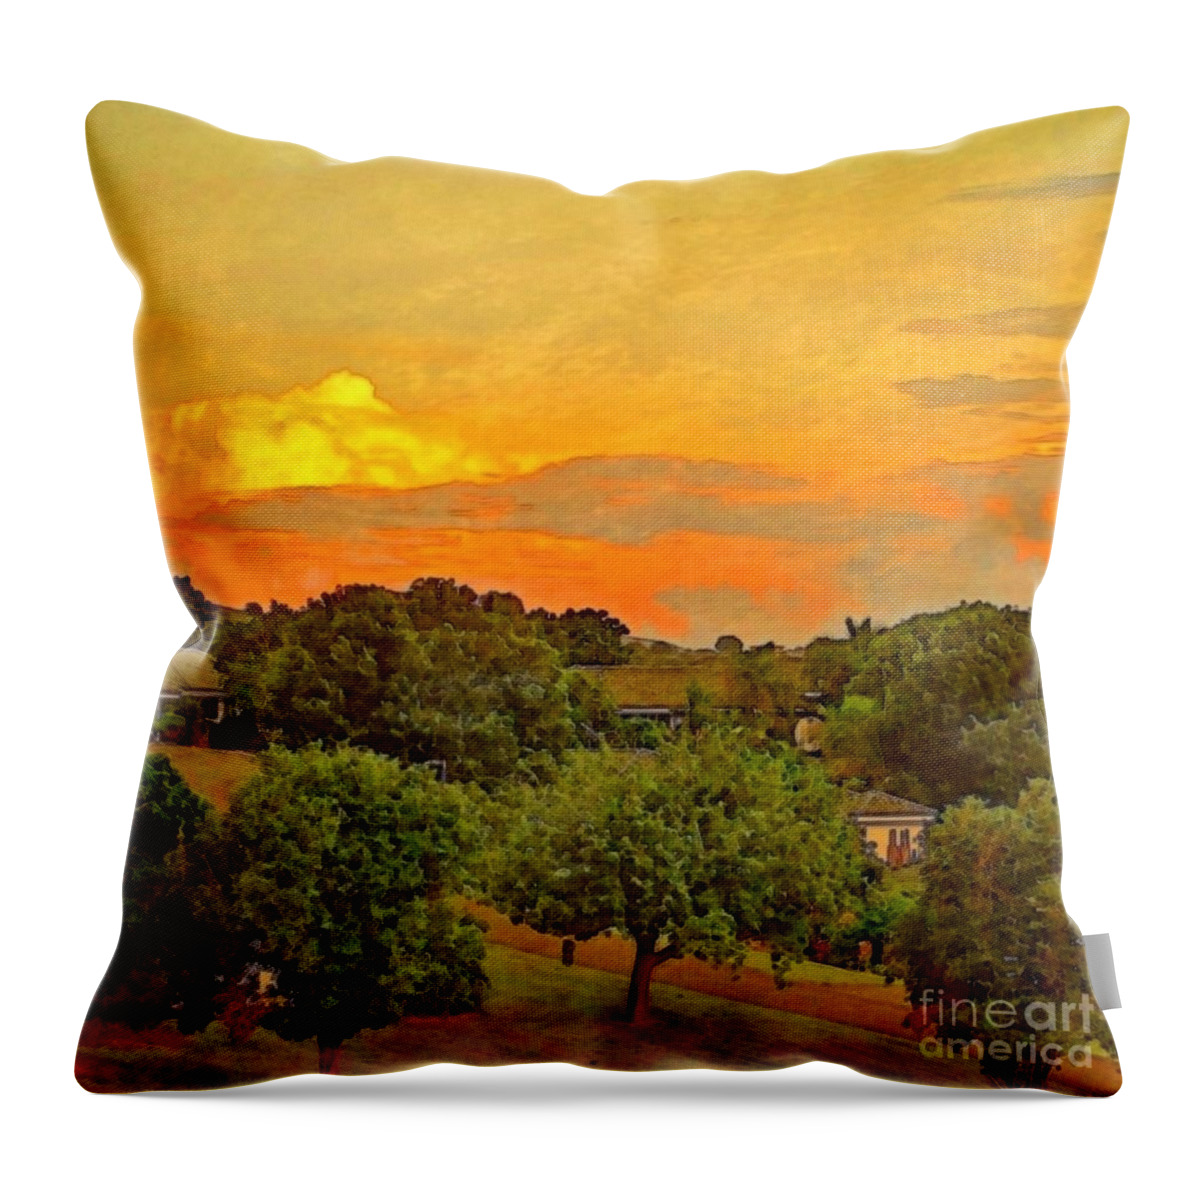 Sharkcrossing Throw Pillow featuring the painting S Sunset Over Orchard - Square by Lyn Voytershark